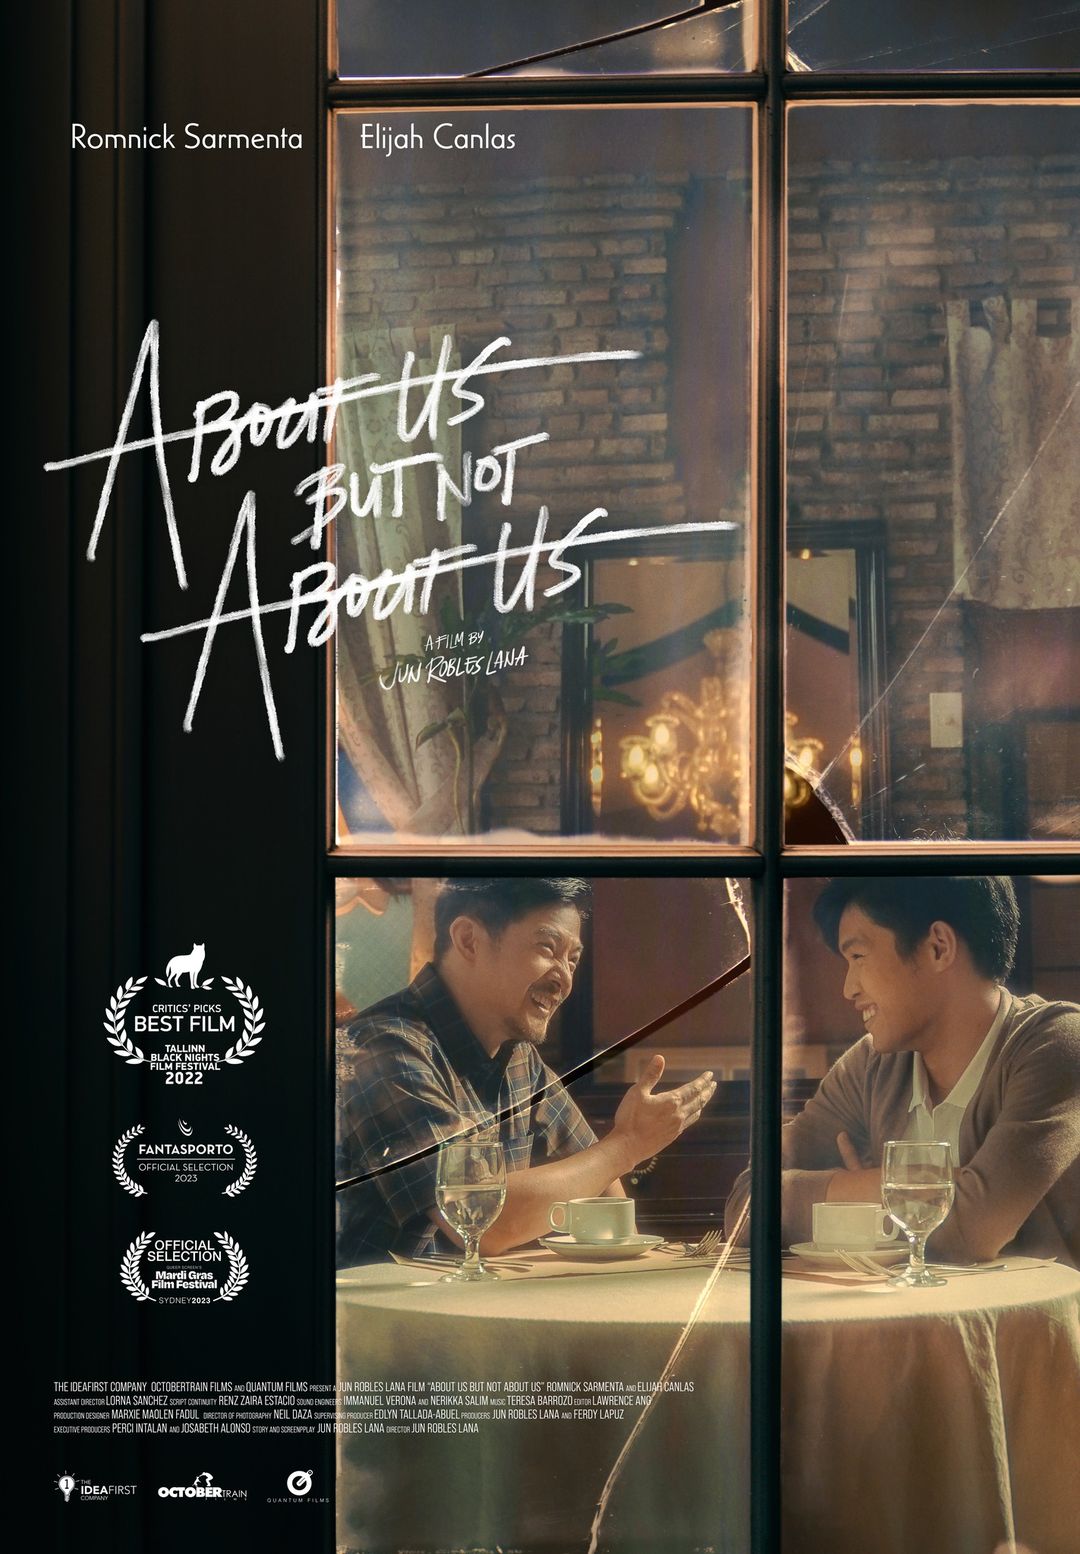 About Us But Not About Us film poster MMFF